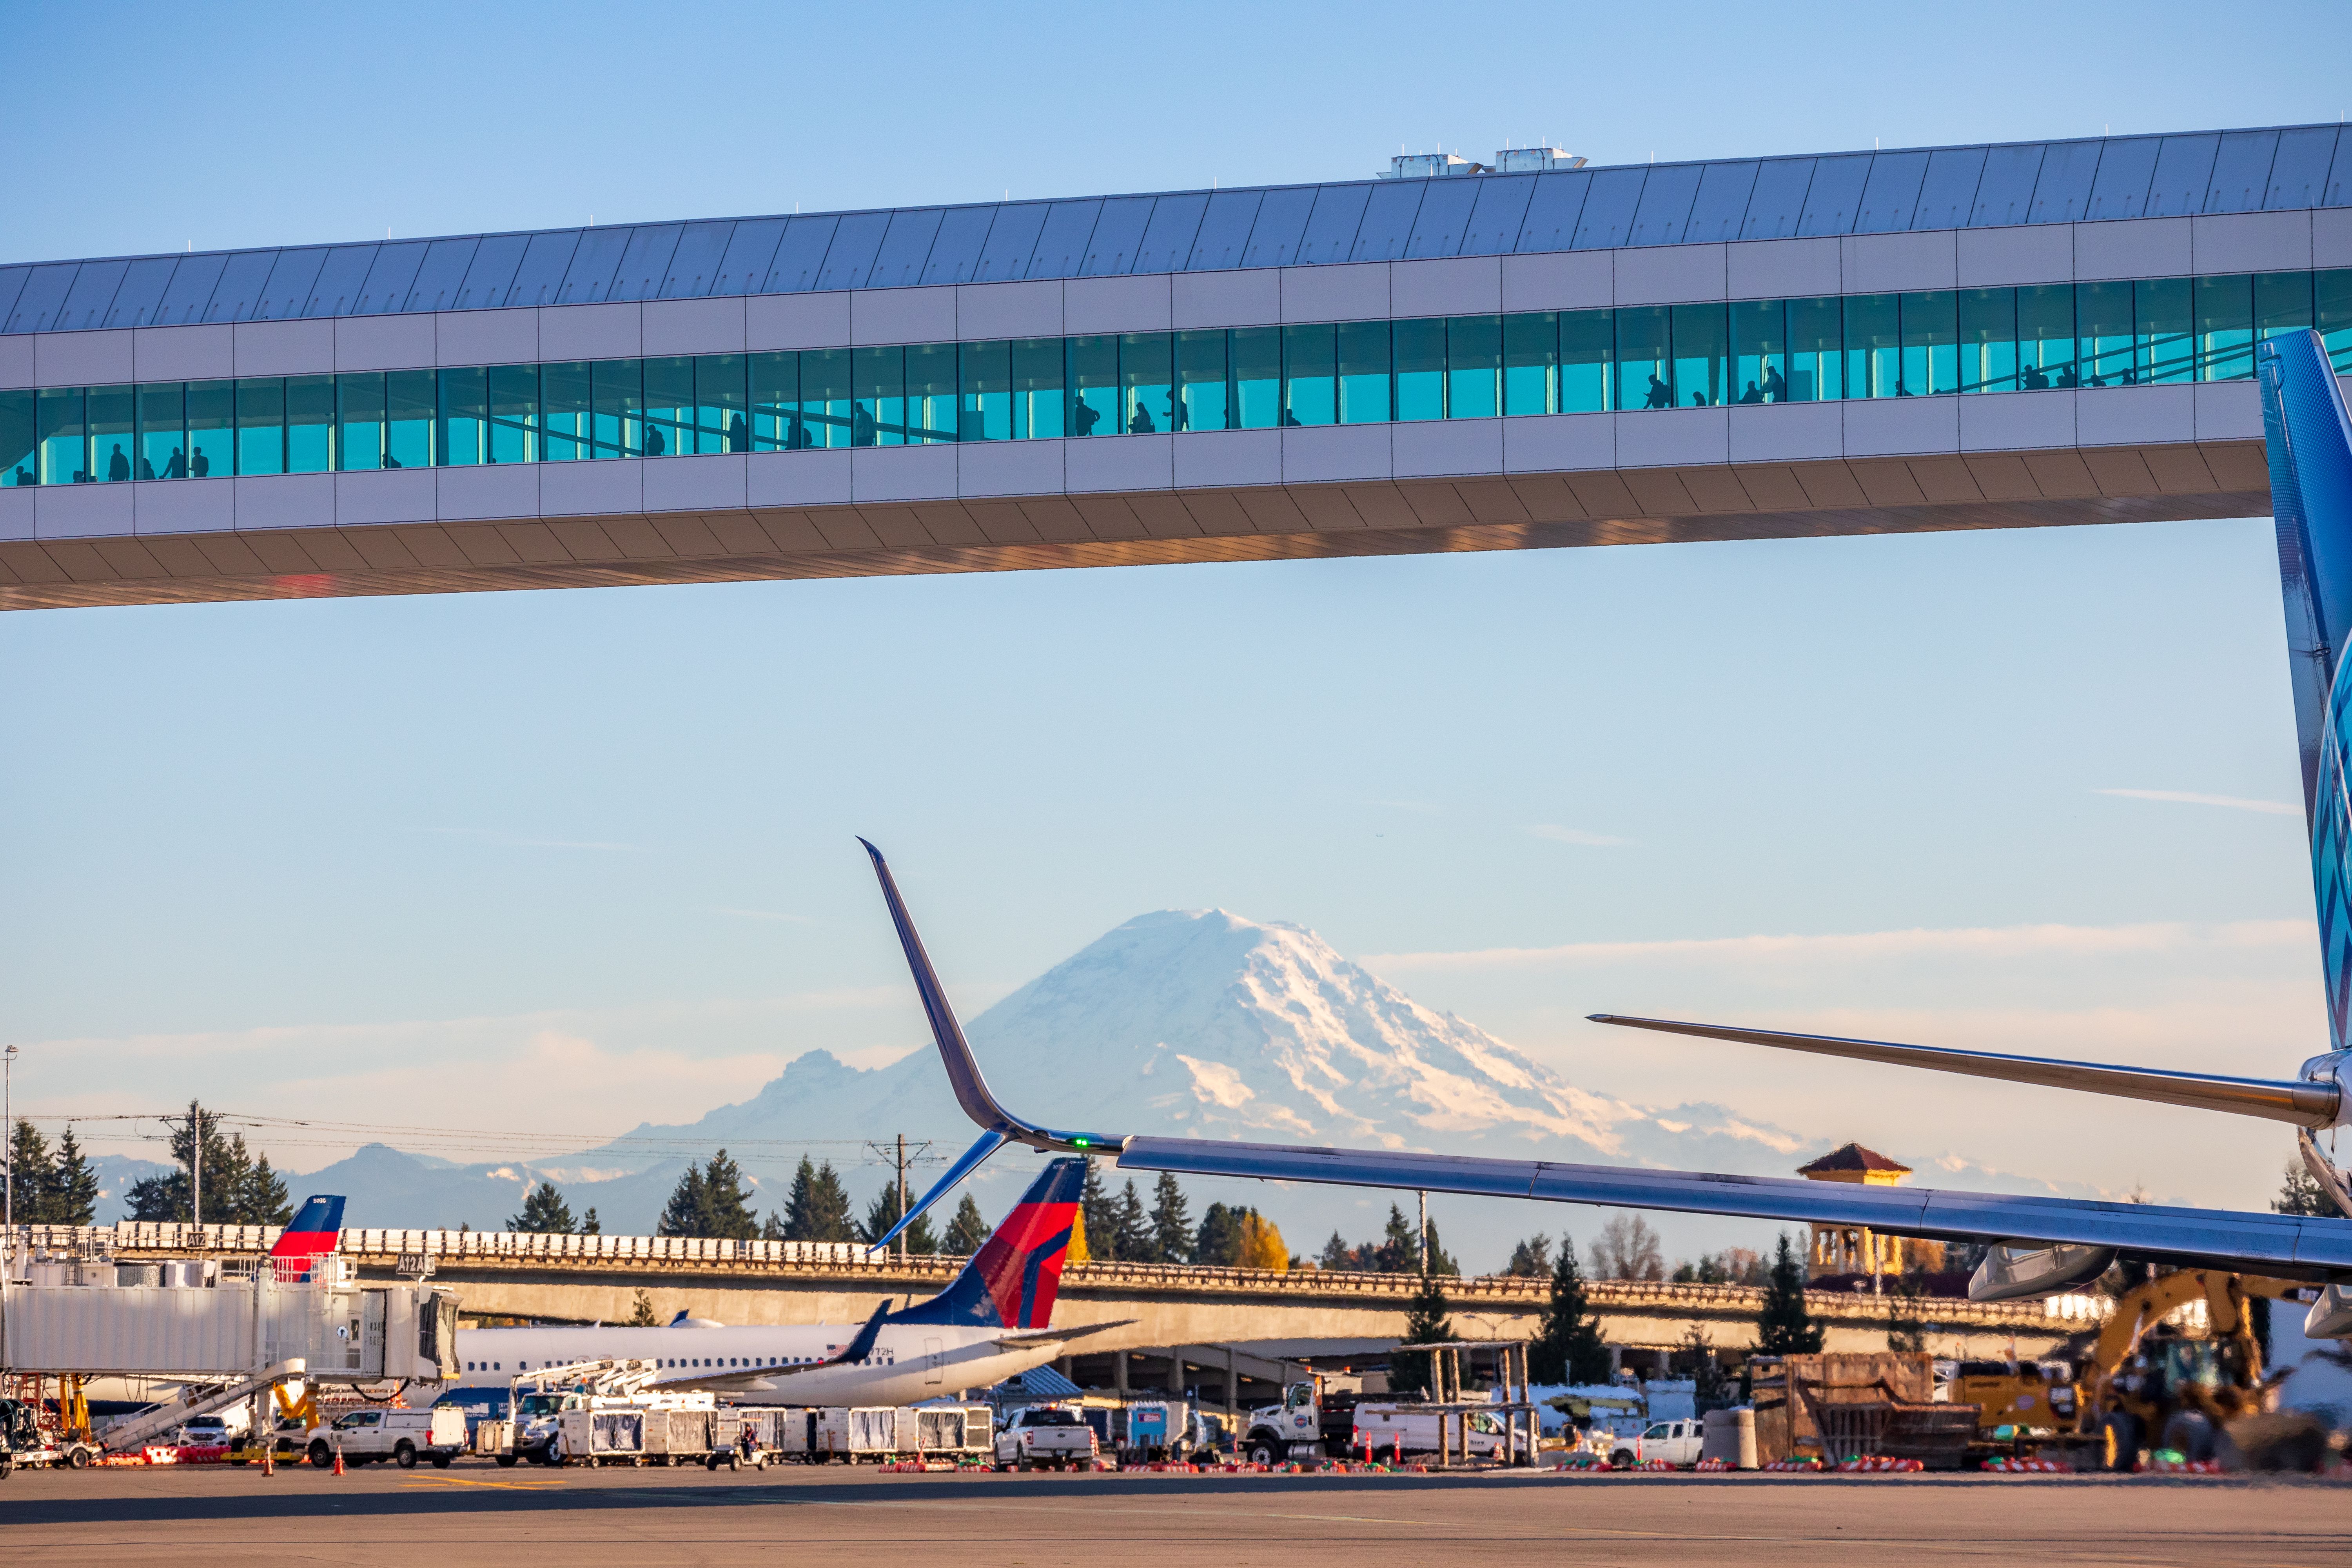 A view from the apron at Seattle Tacoma International Airport looking towards a mountain.